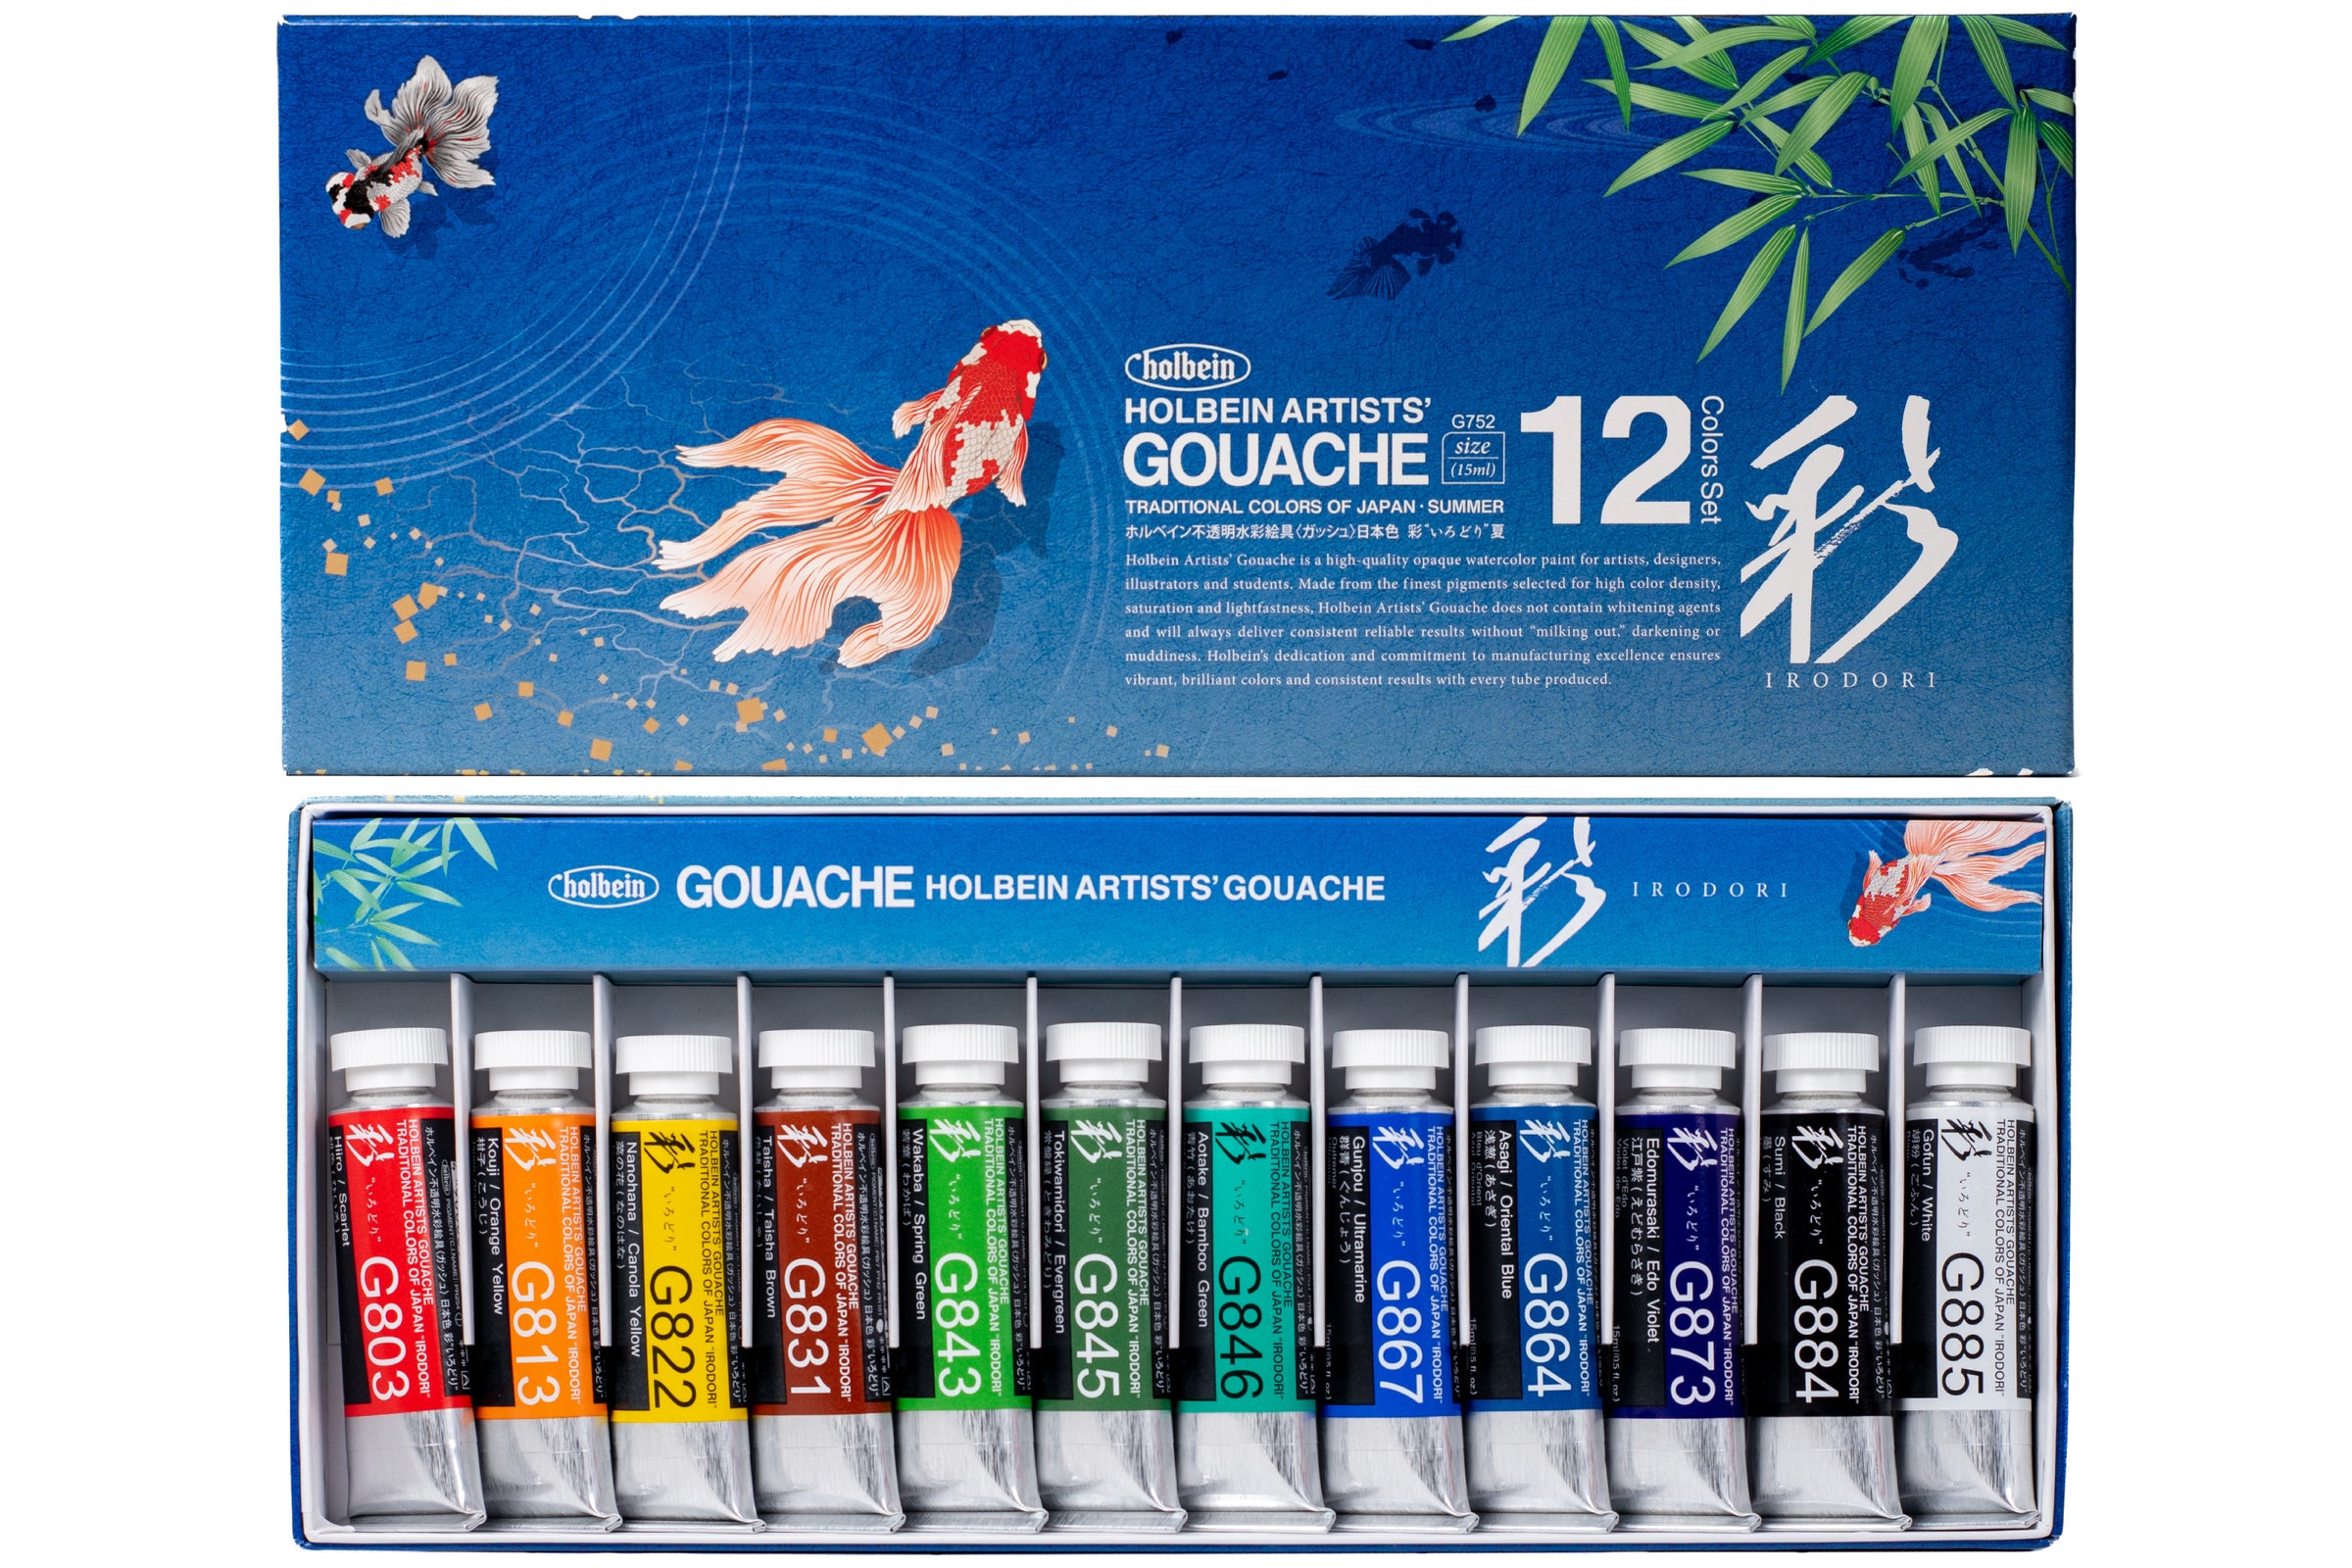 Holbein Artists' Gouache - The Art Store/Commercial Art Supply